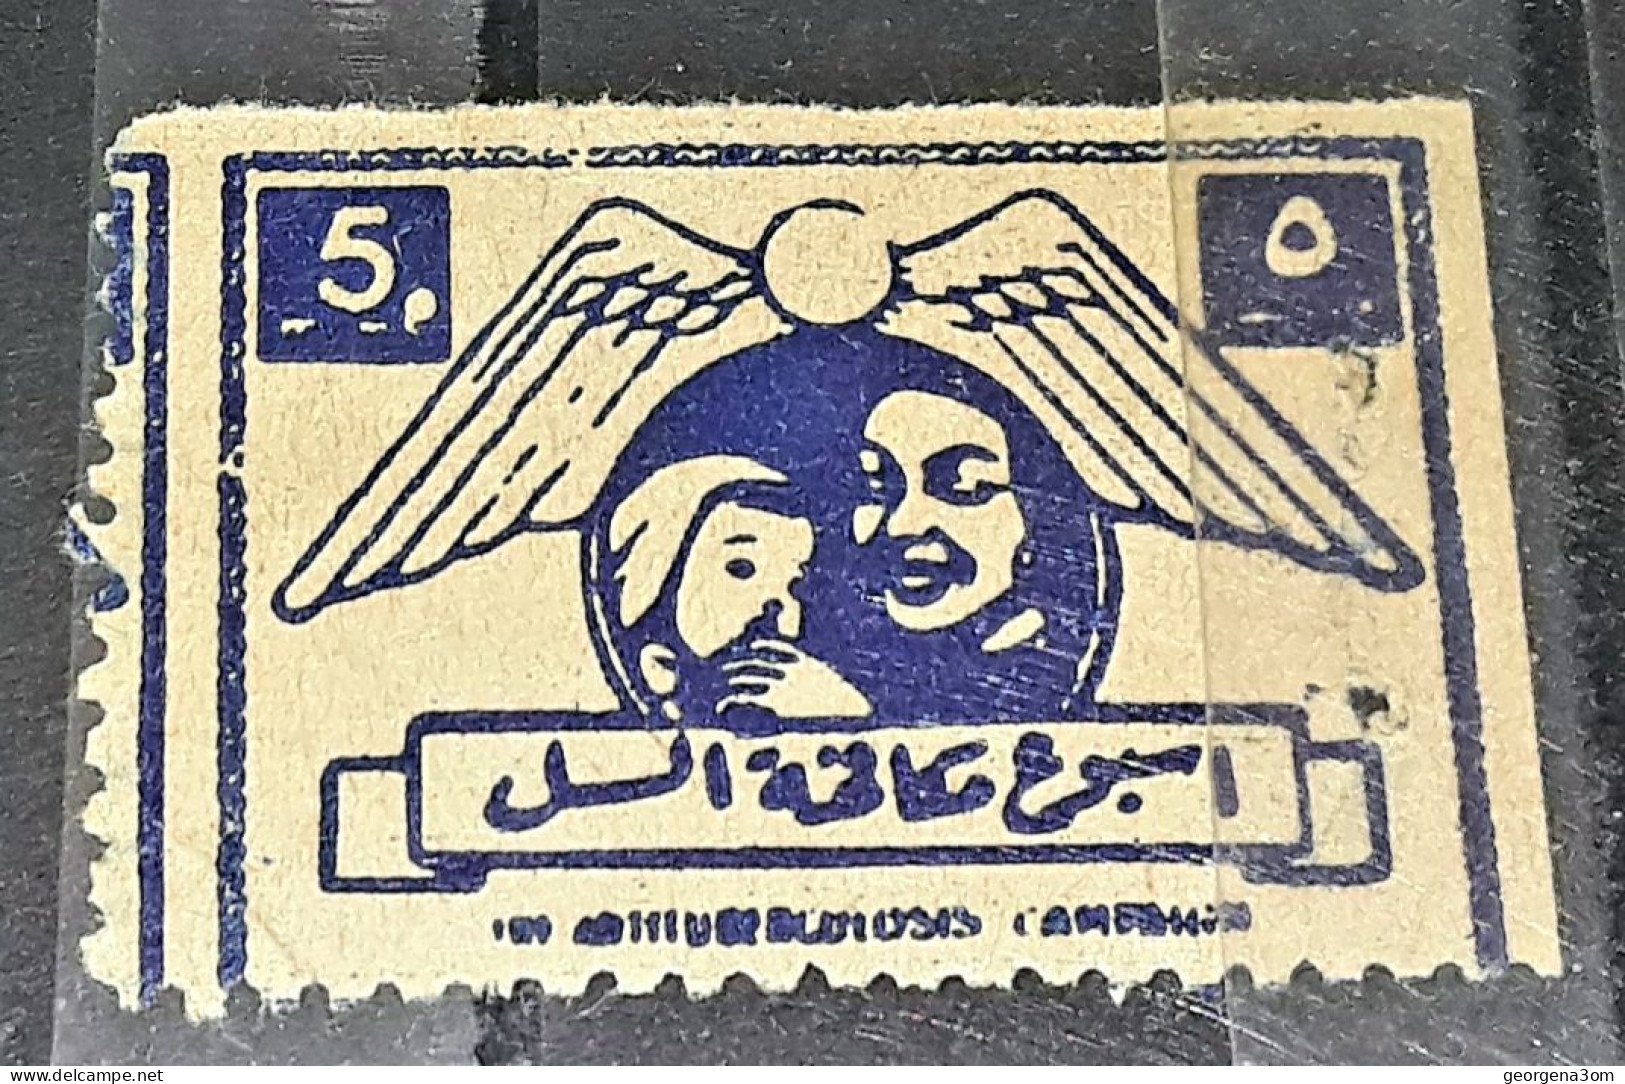 EGYPT VERY RARE OLD LABEL AGAINST TUBERCULOSIS ... VERY HARD TO FIND THIS LABEL - Hotelaufkleber